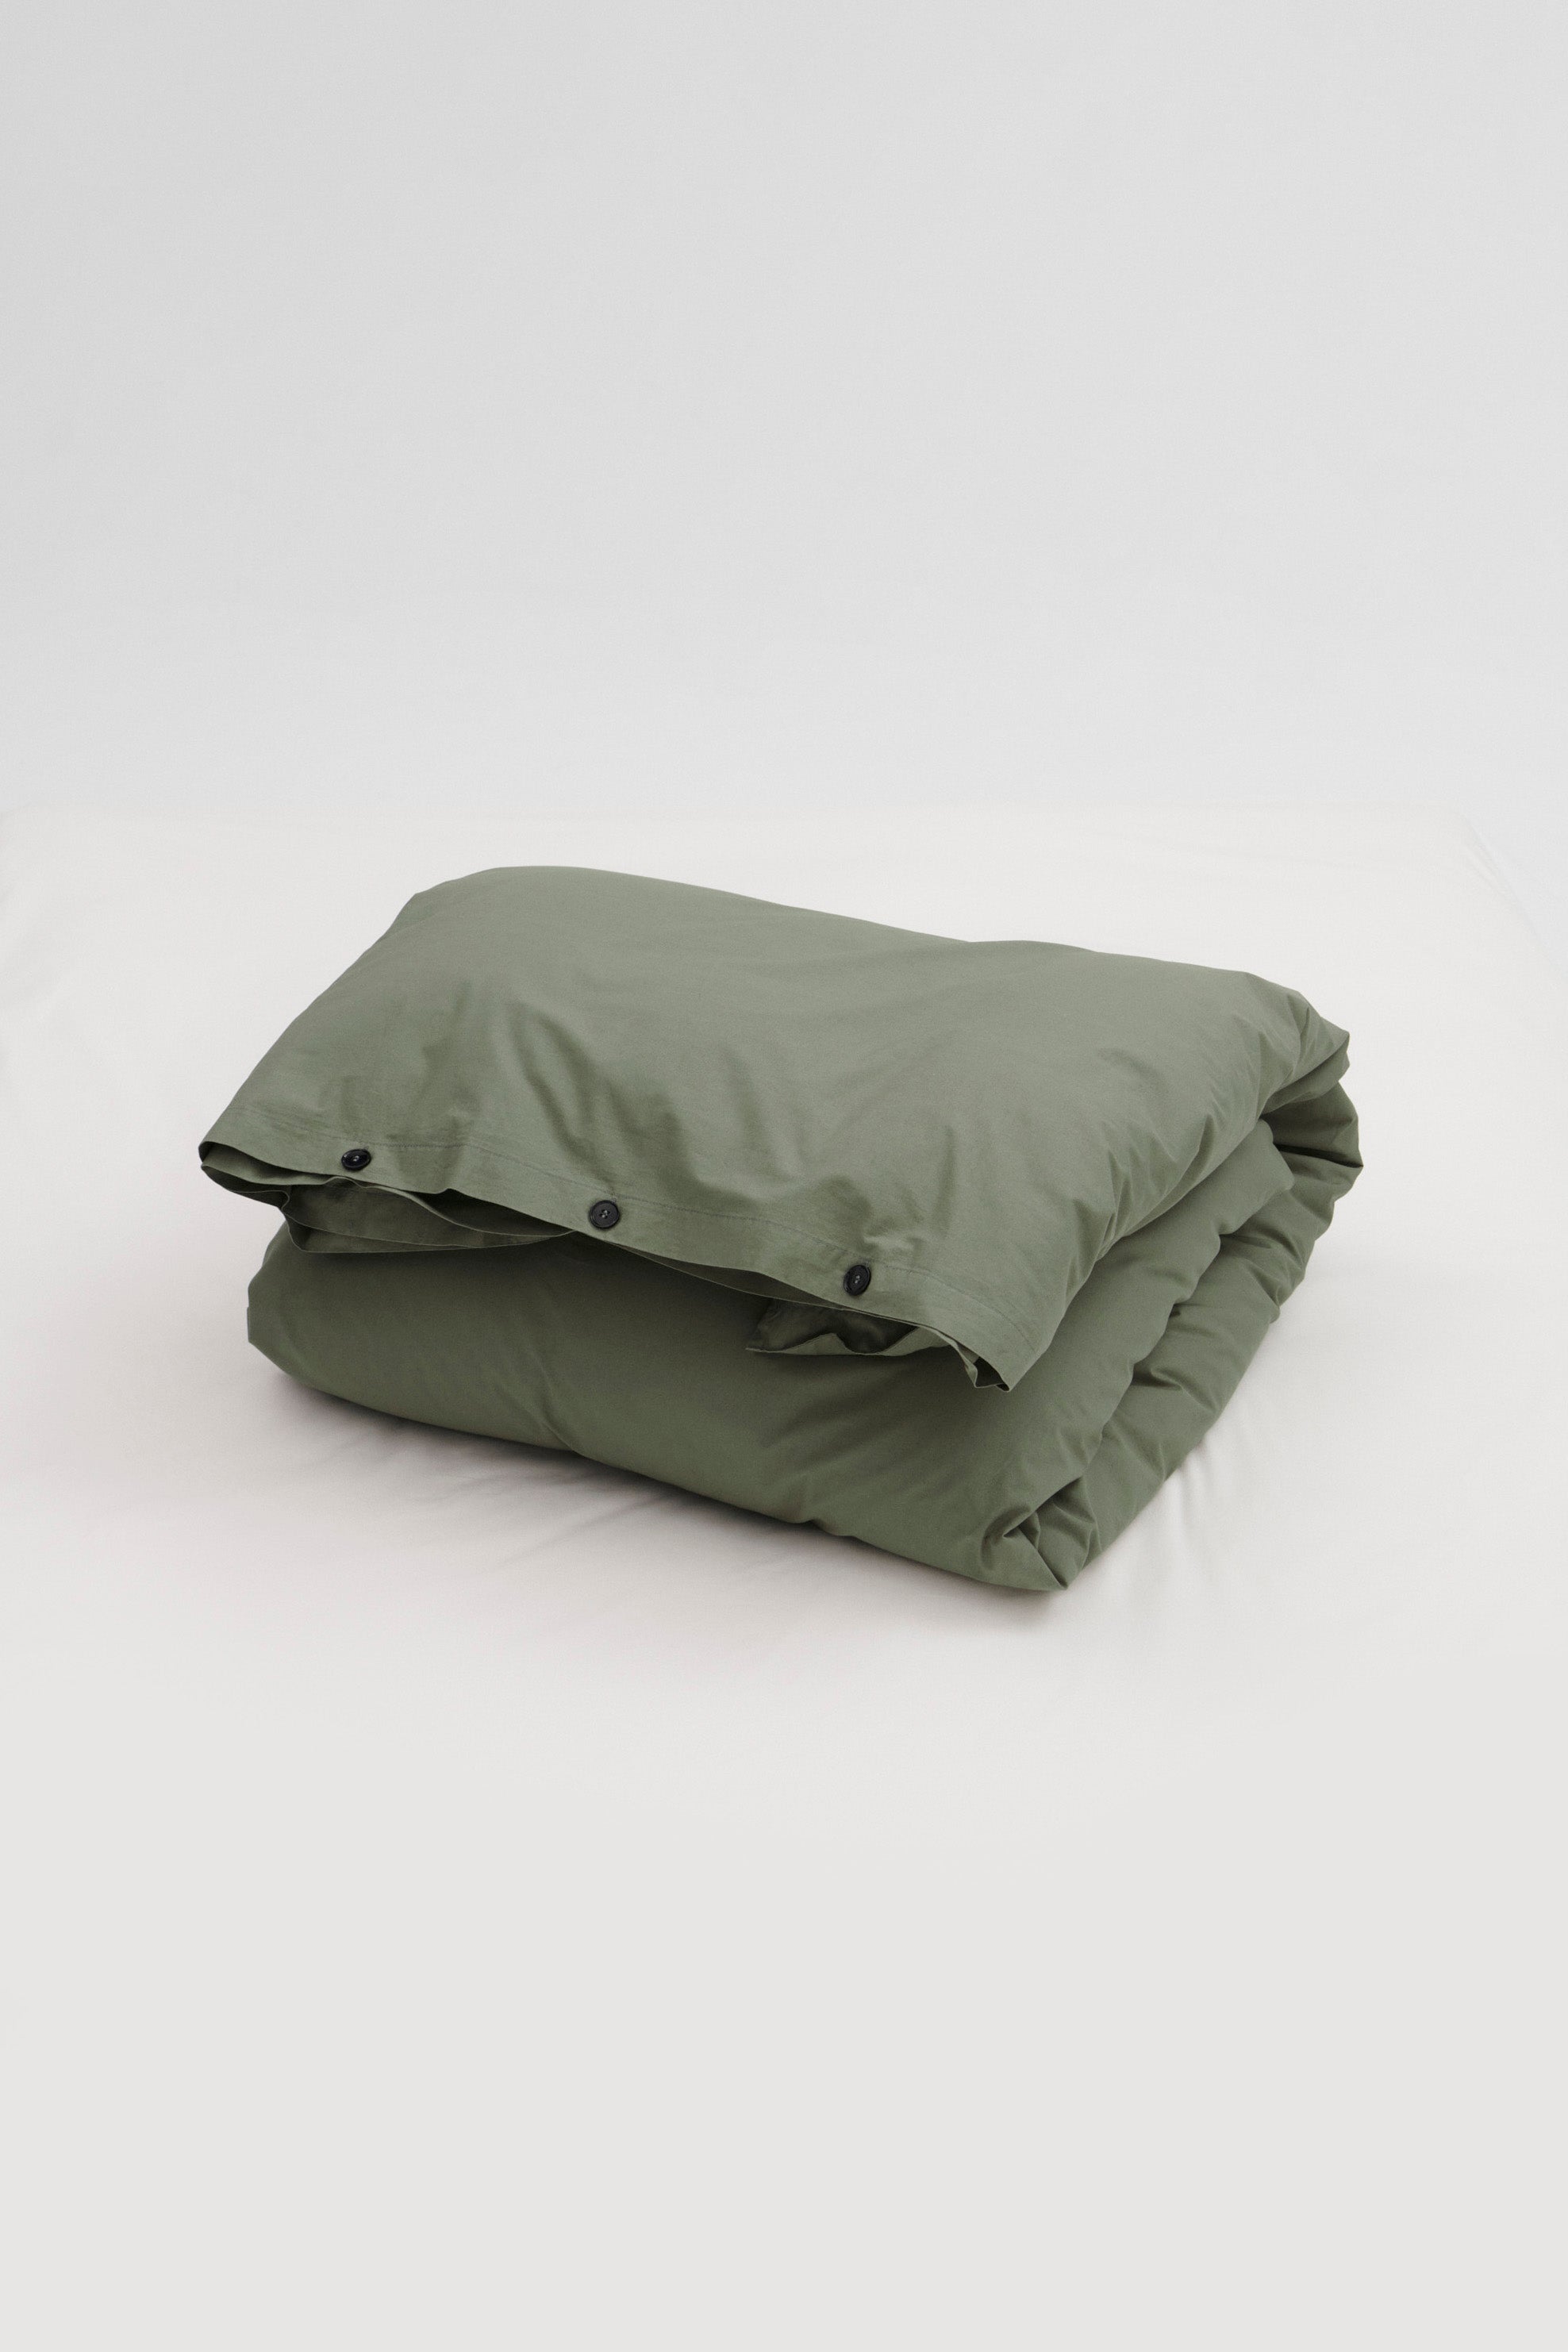 Percale Double Duvet Olive Green